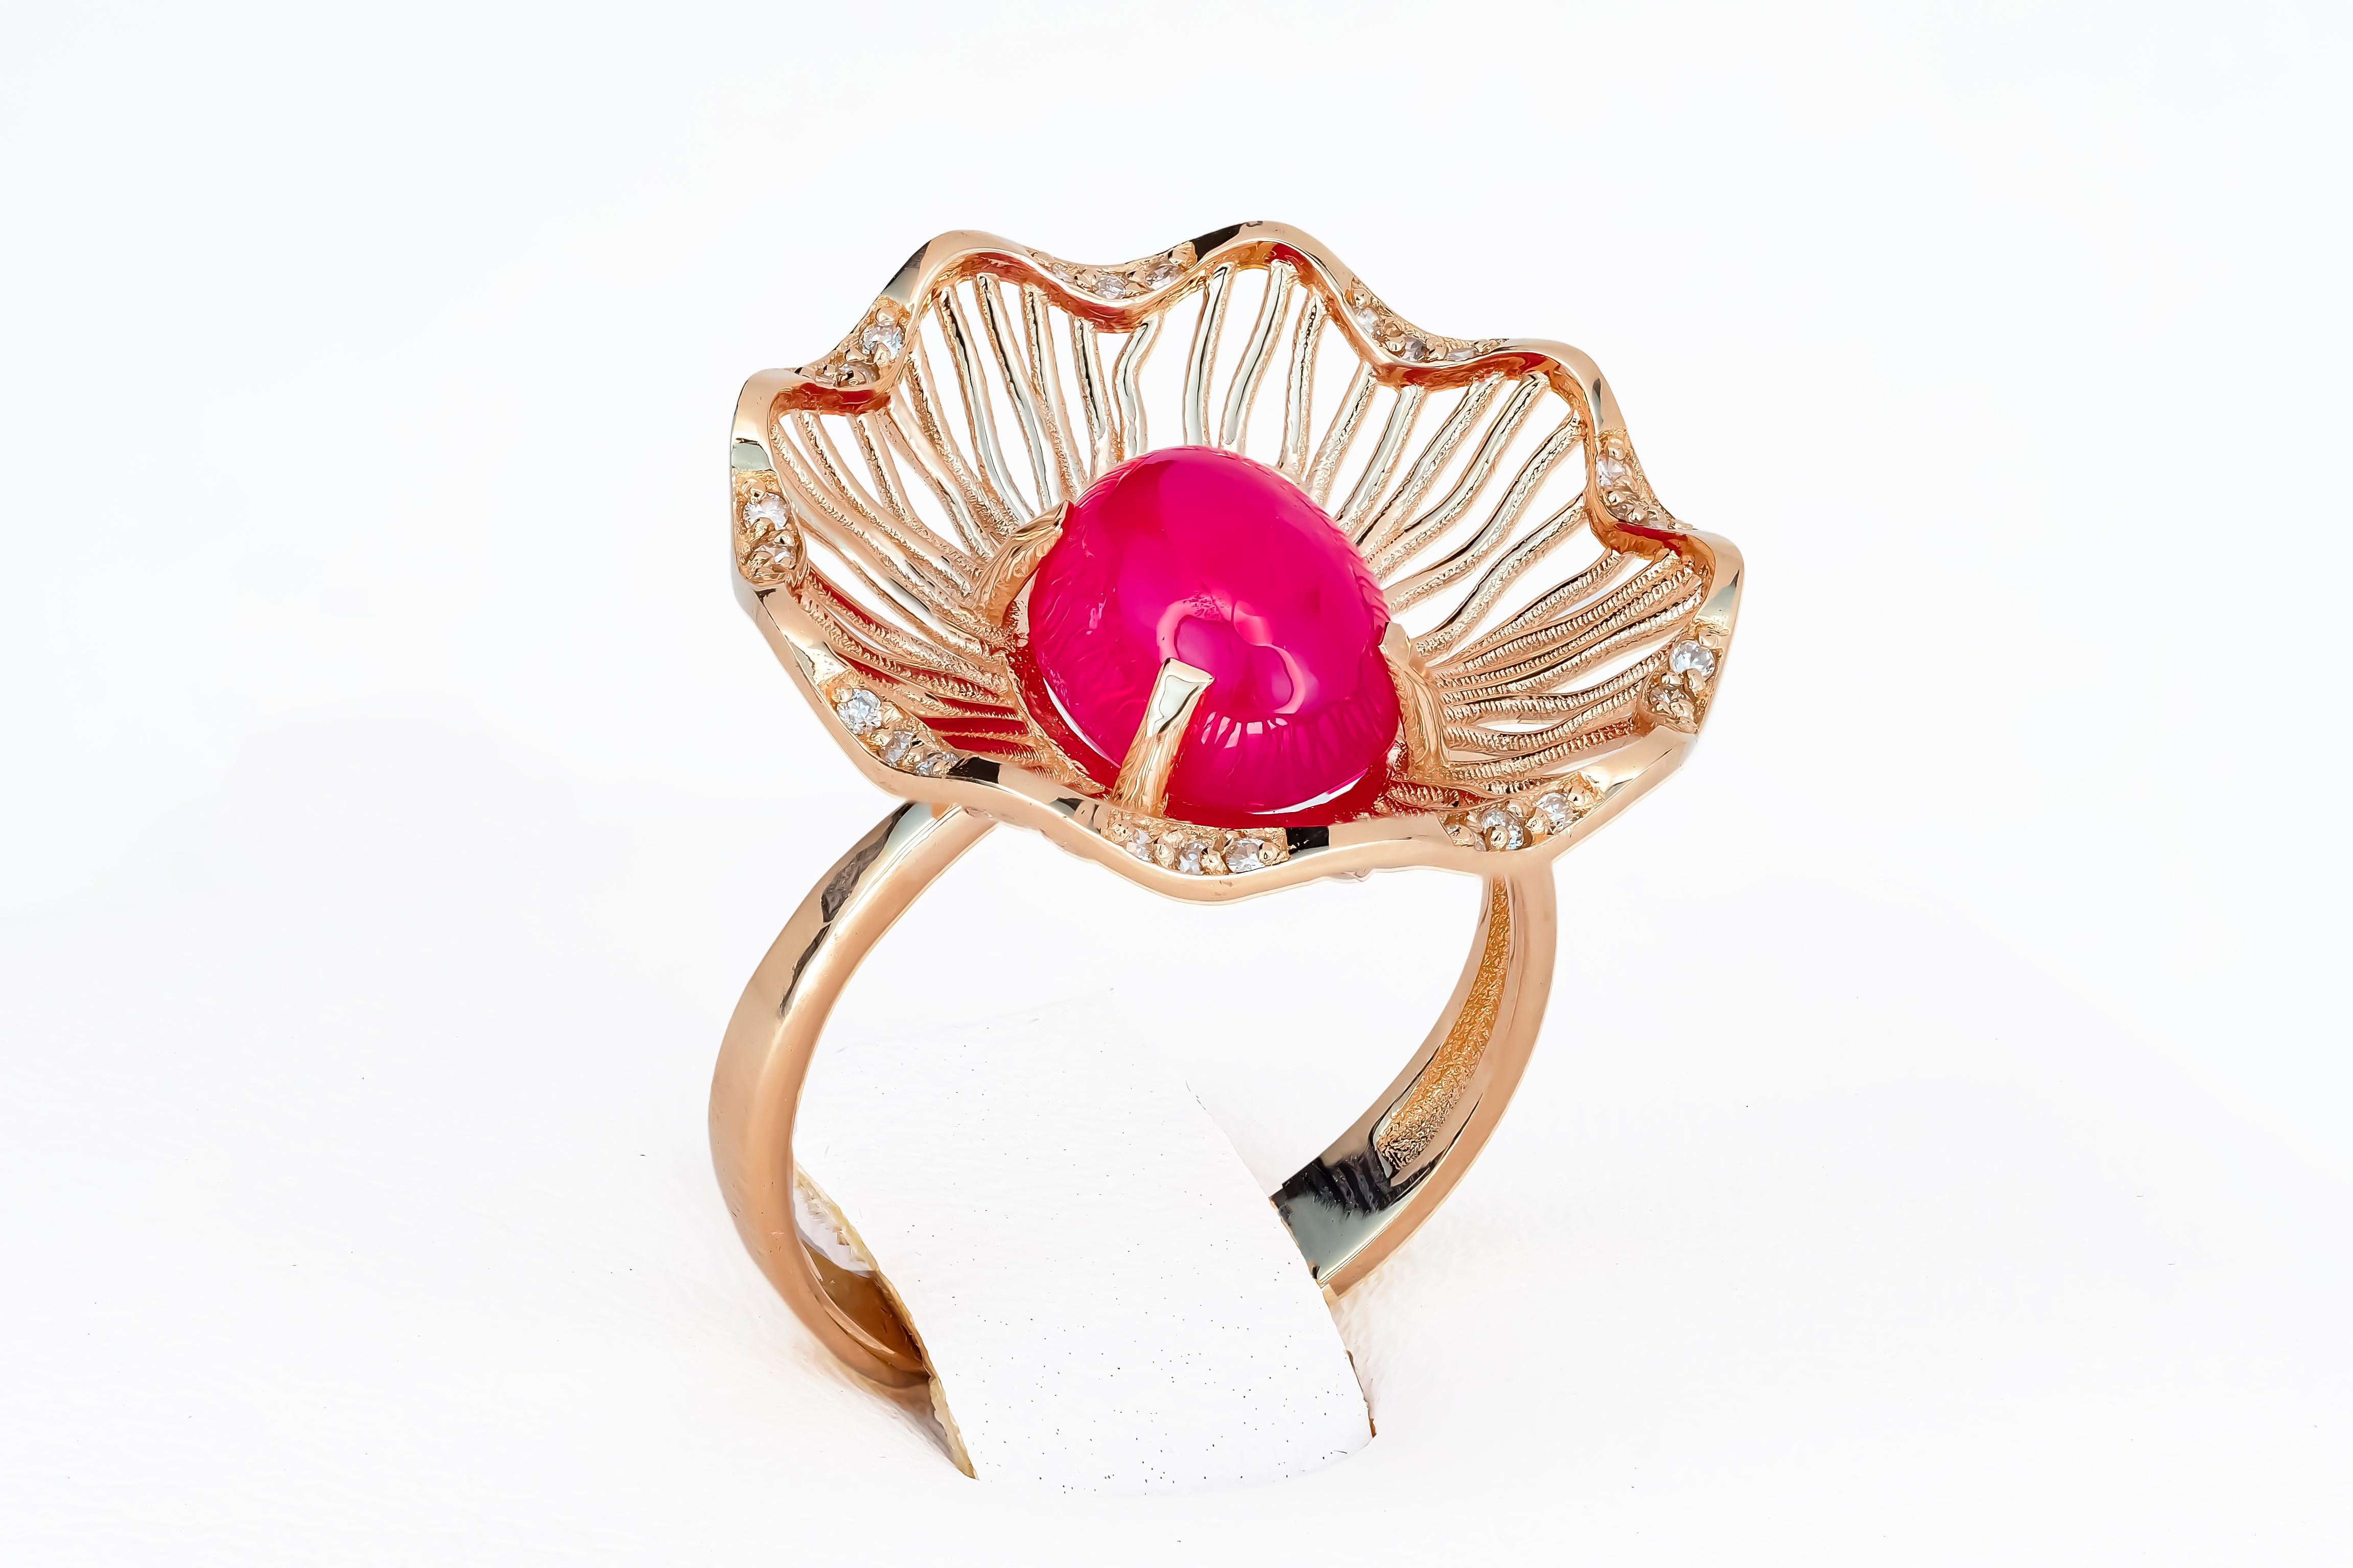 Portrait Cut Pink Gold Ring with Ruby and Diamonds, Vintage Style Ring with Ruby Cabochon